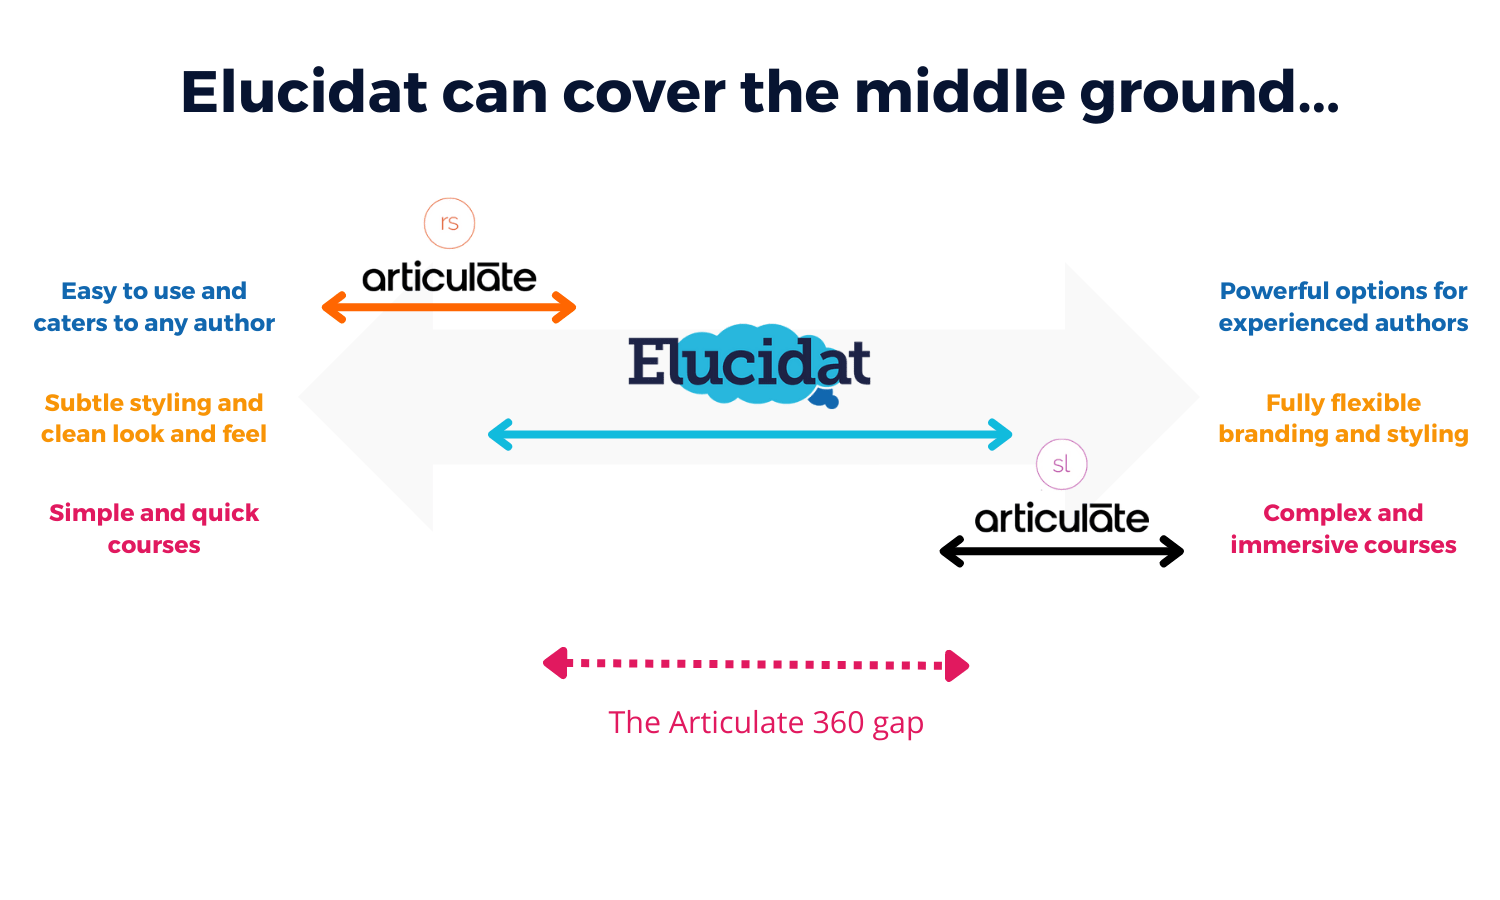 articulate 360 gap - Elucidat can cover the middle ground